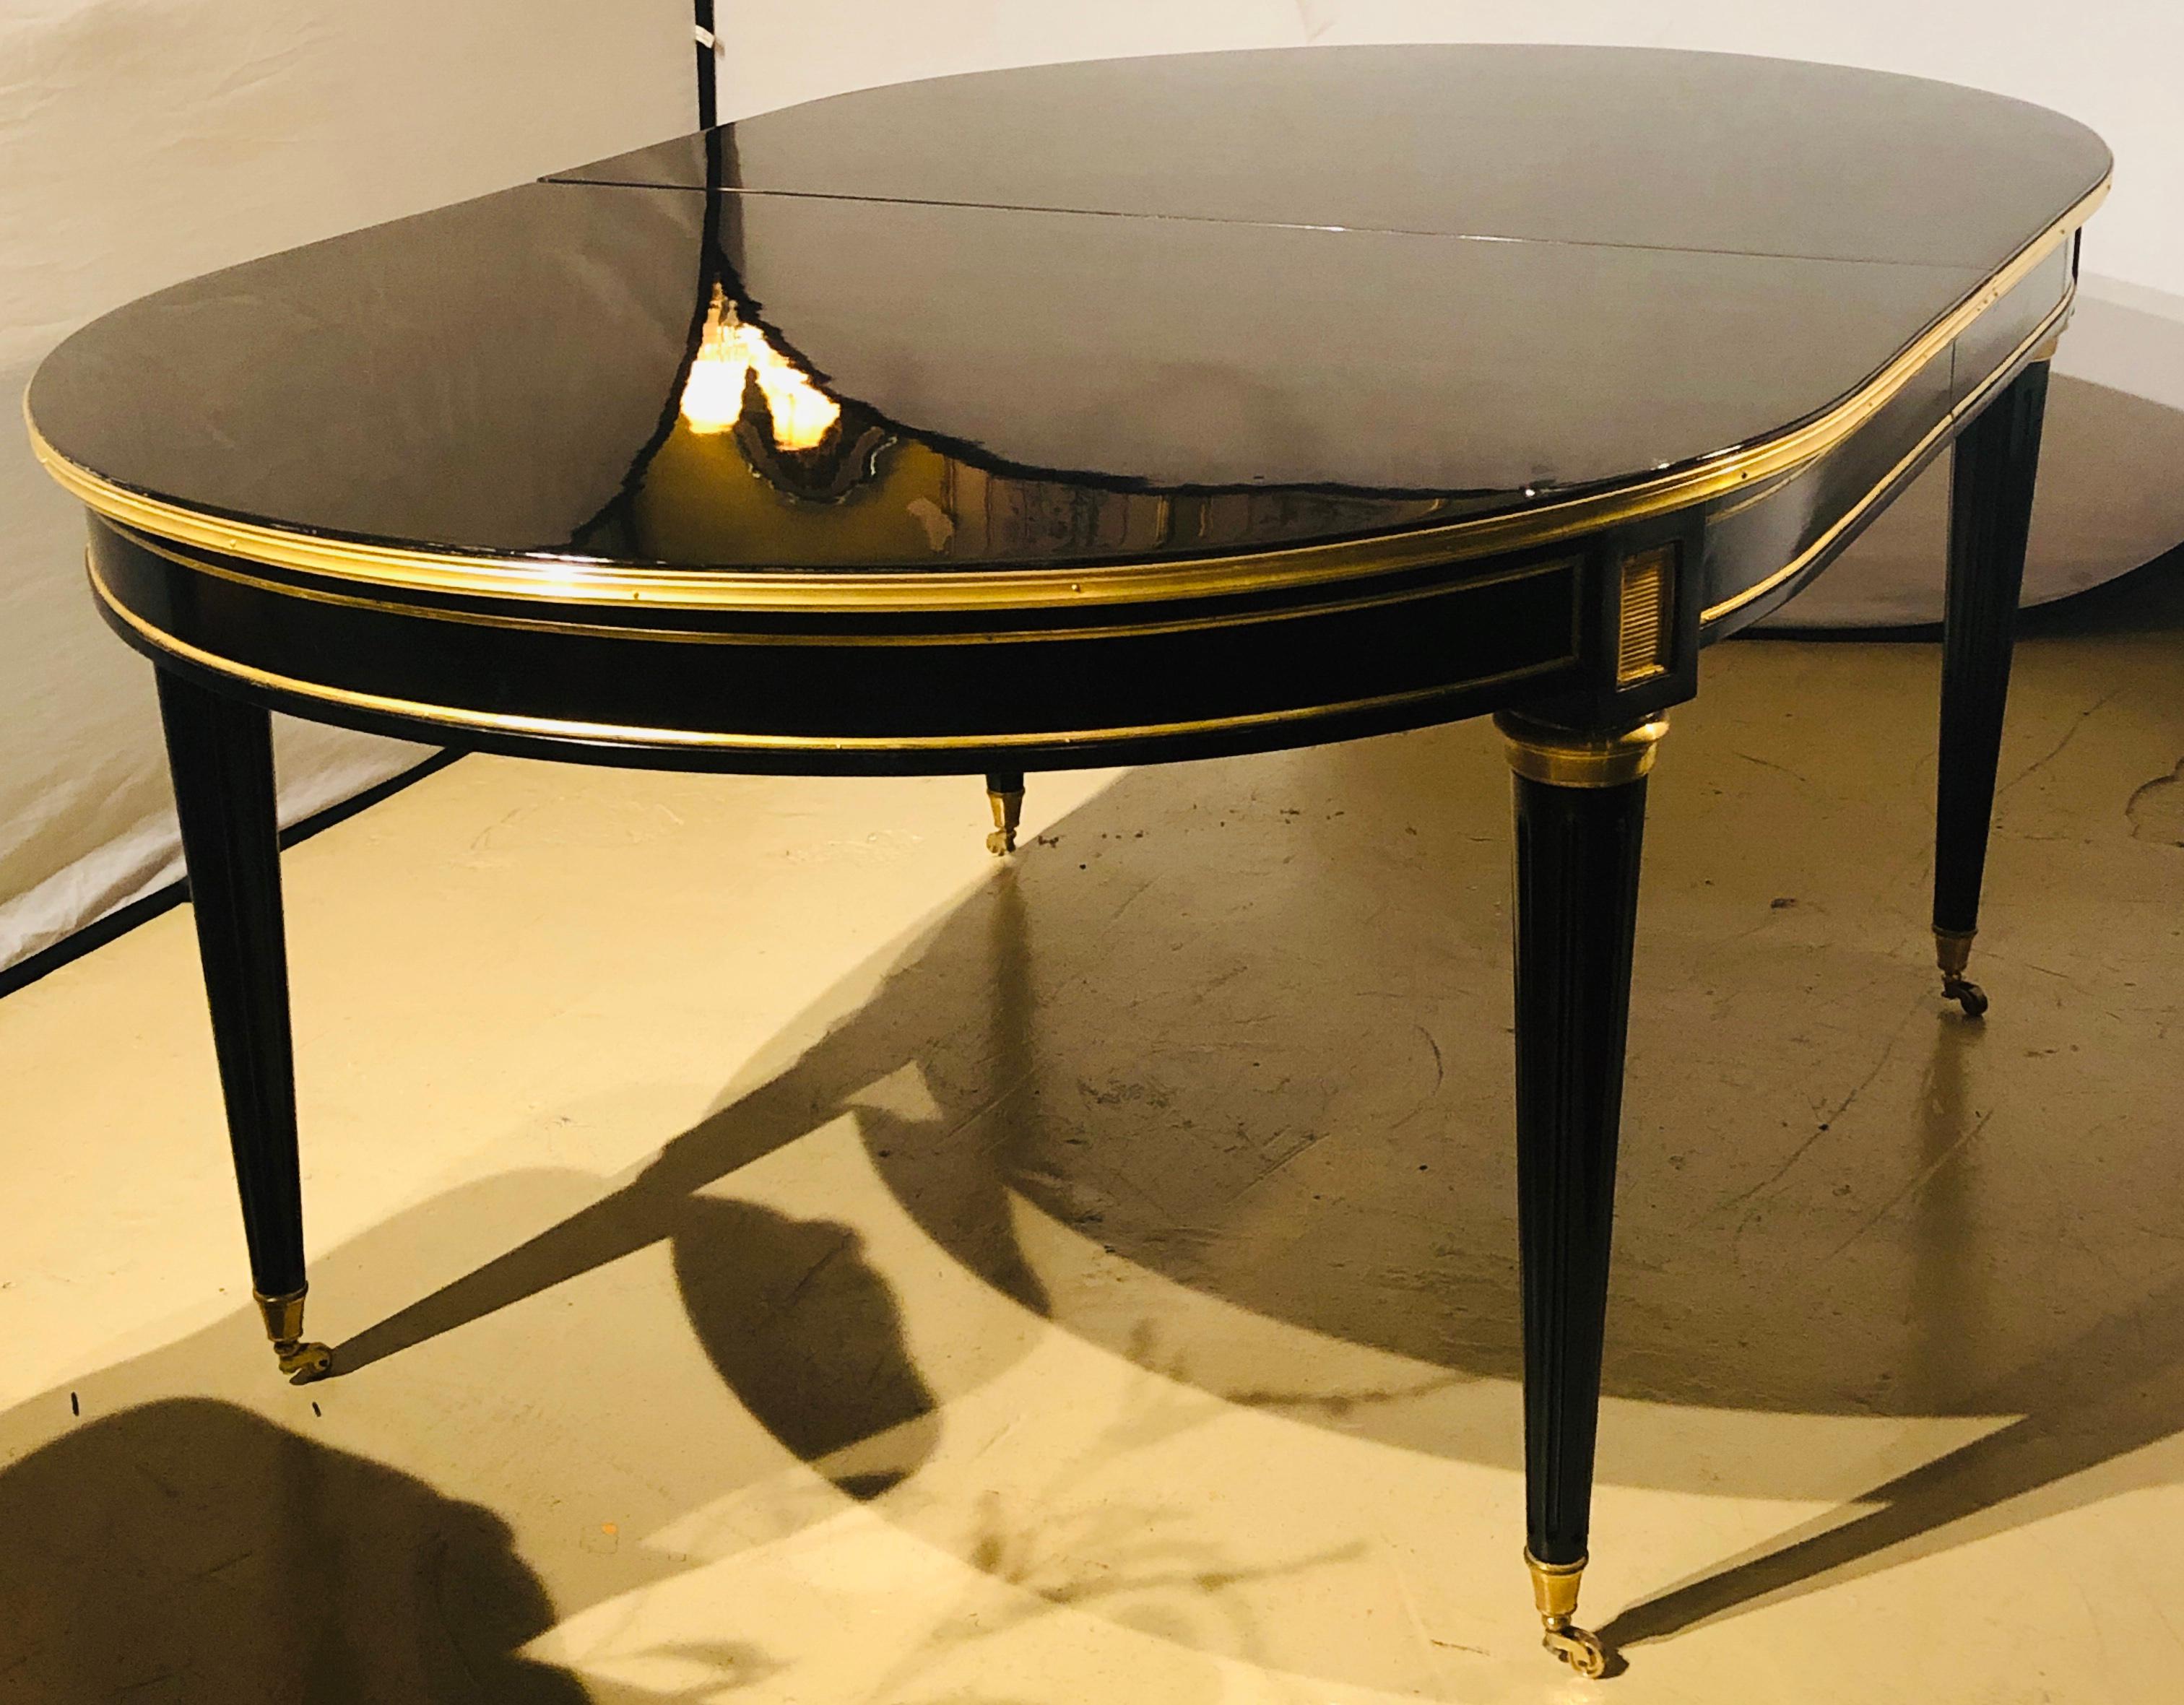 Maison Jansen style ebony lacquered dining table in Hollywood Regency fashion having three leaves measuring 15.5 inches each in stunning condition. This fine dining table certain to shine in any setting.
An ebony Maison Jansen style ten plus foot